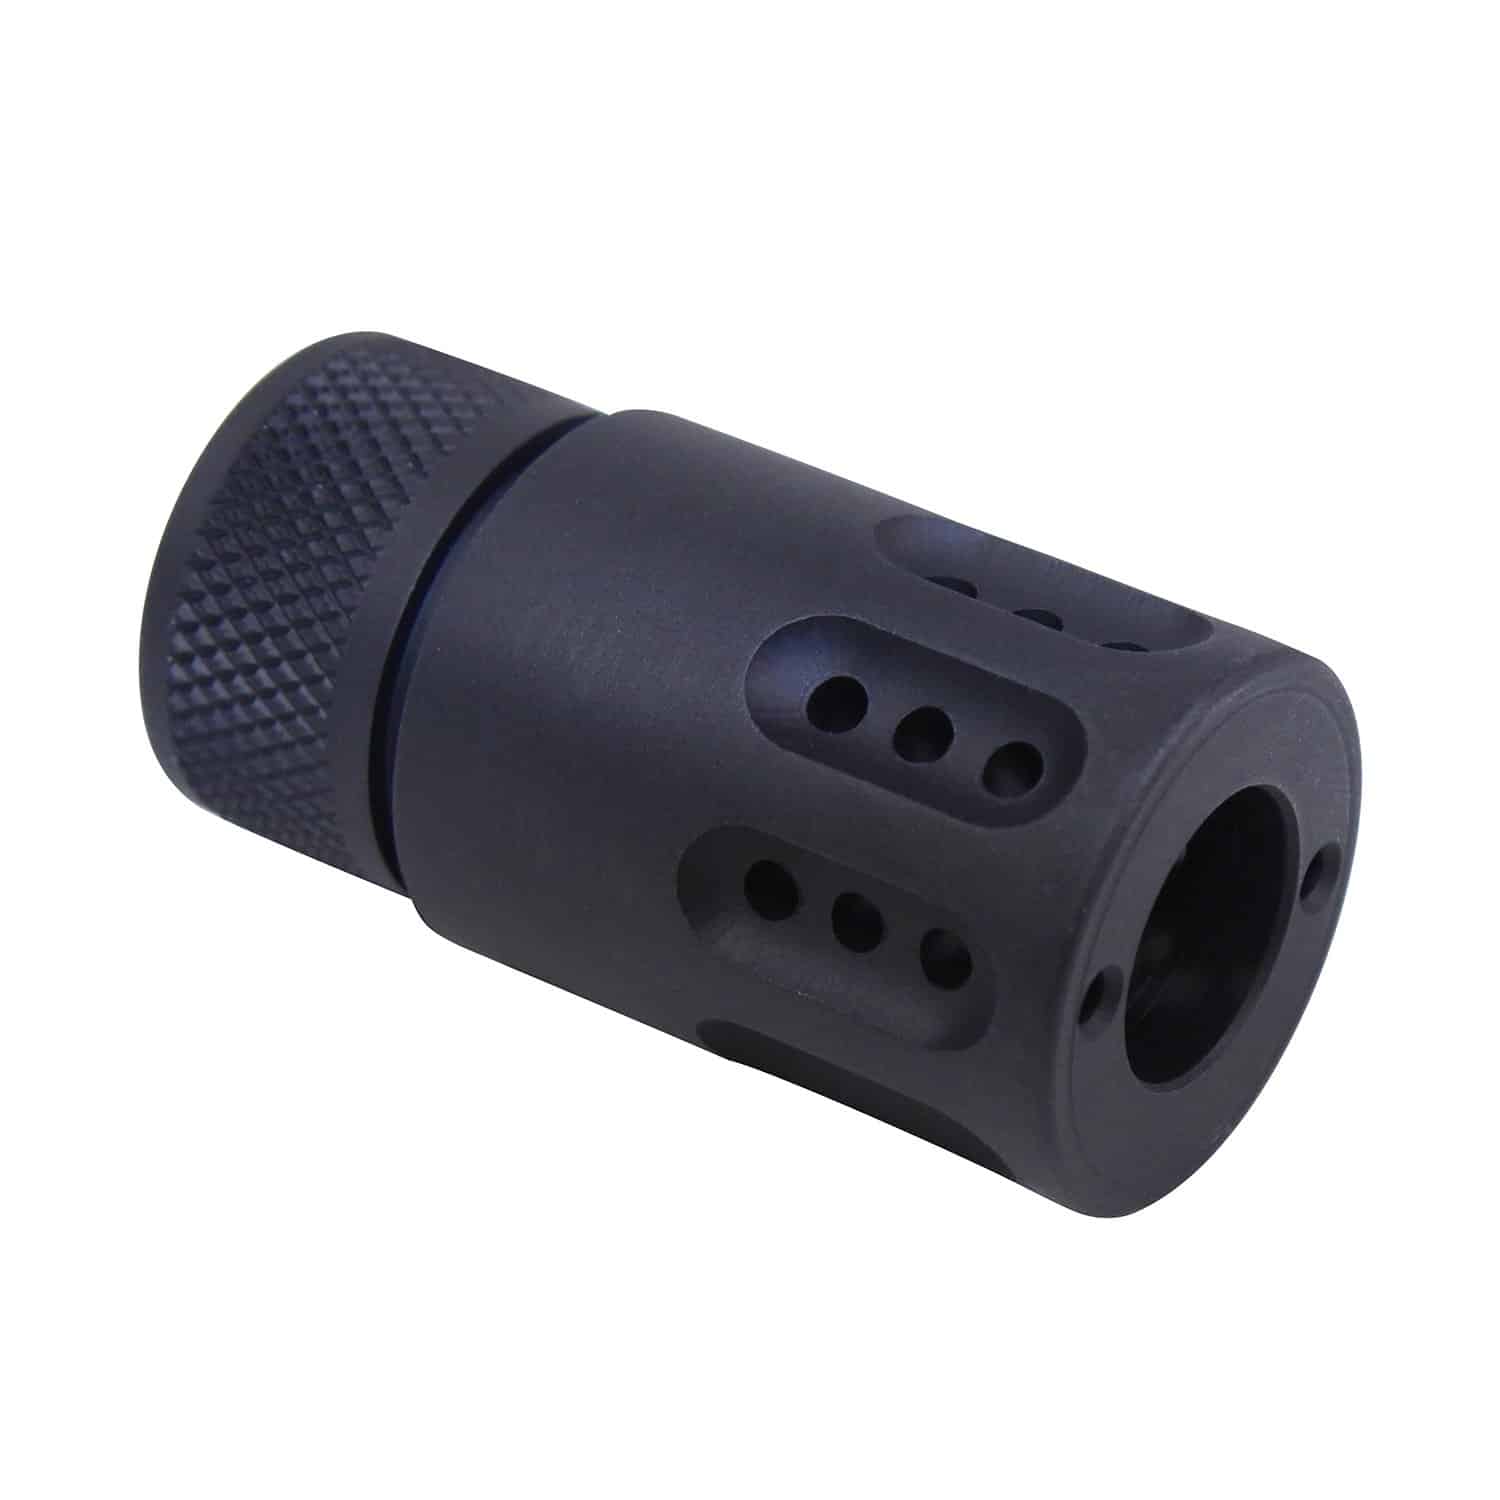 AR 308 muzzle brake with a matching slip-over barrel shroud in black